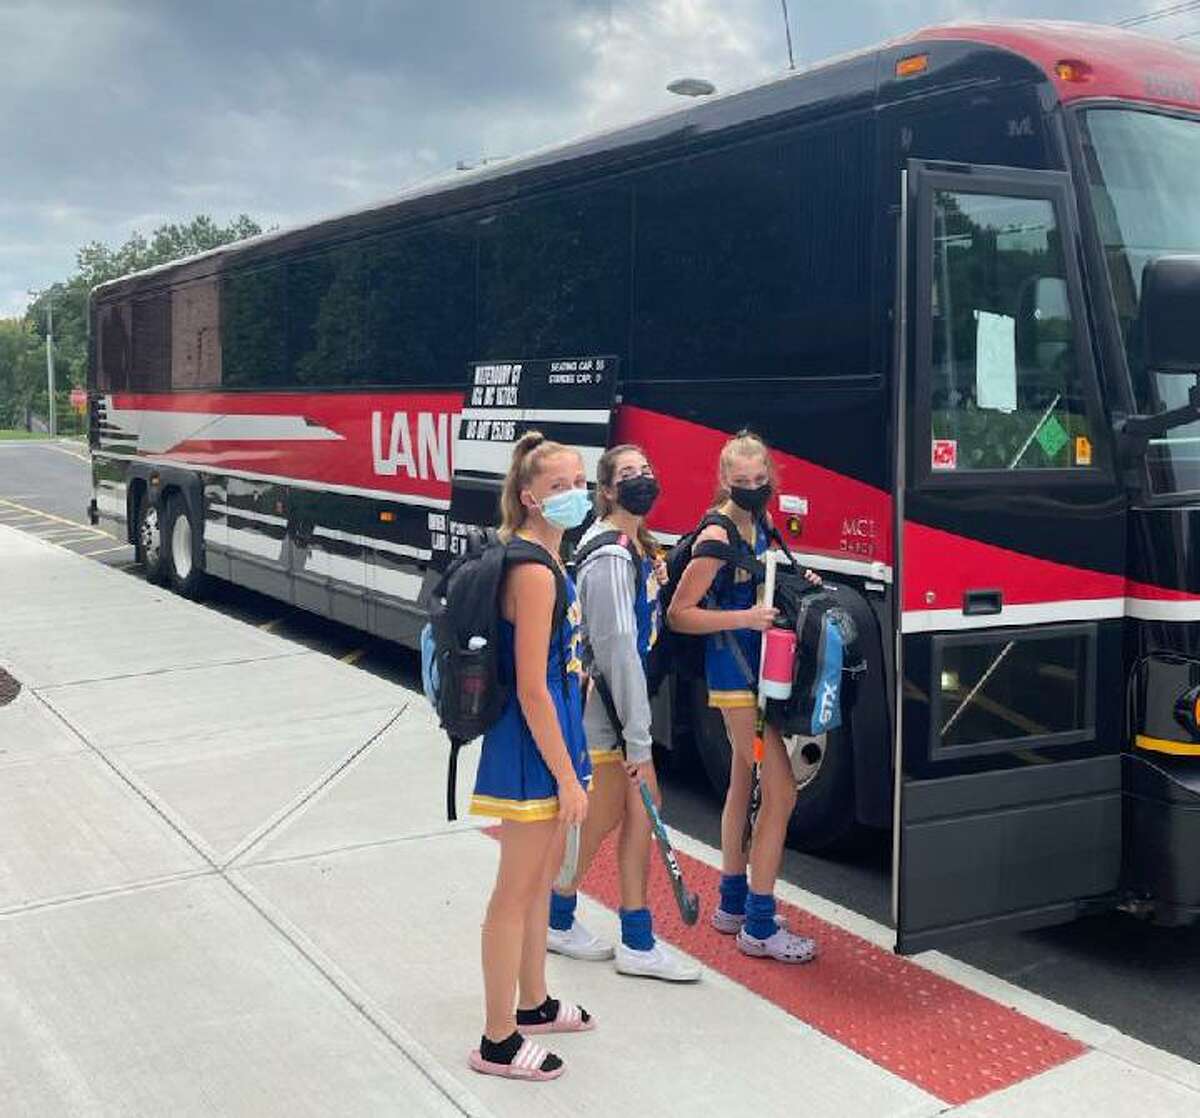 The Brookfield field hockey team boards a coach bus the Bobcats had to use to a game at Nonnewaug in Woodbury on Tuesday. Brookfield is one of many school districts that have had to find alternative modes of transportation due to a bus shortage.